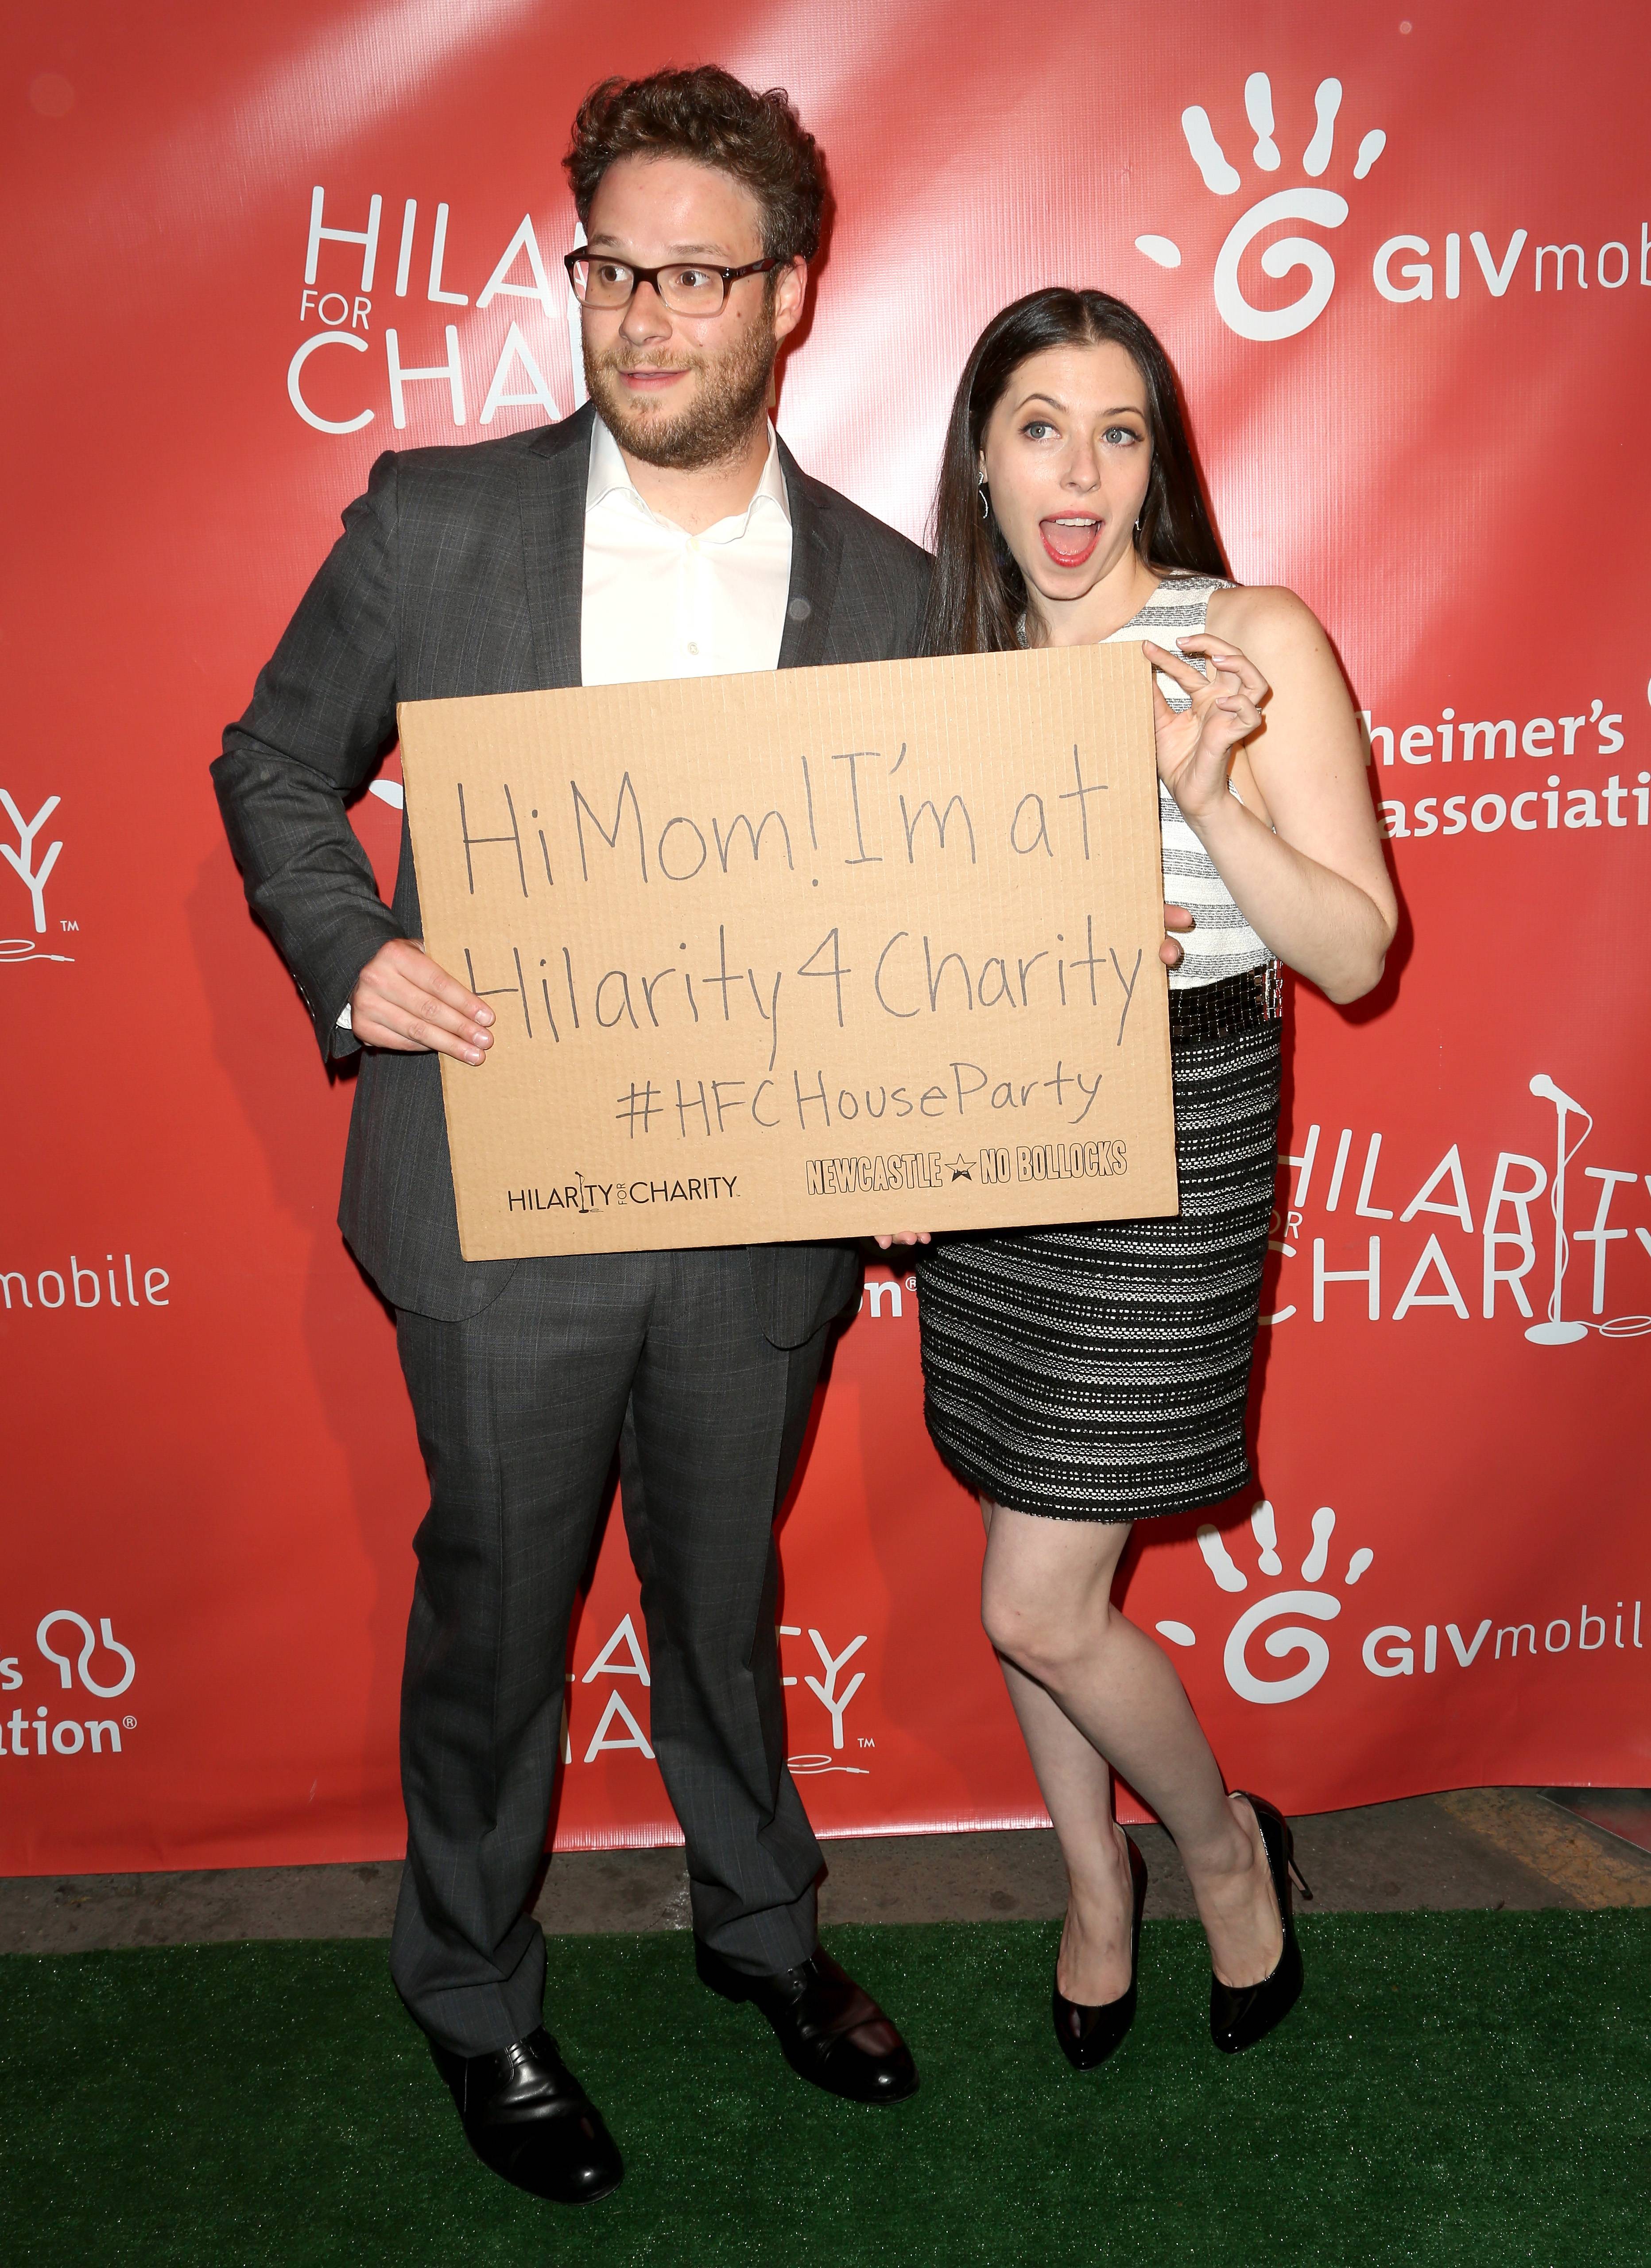 Second Annual Hilarity For Charity Benefiting The Alzheimer's Association - Red Carpet